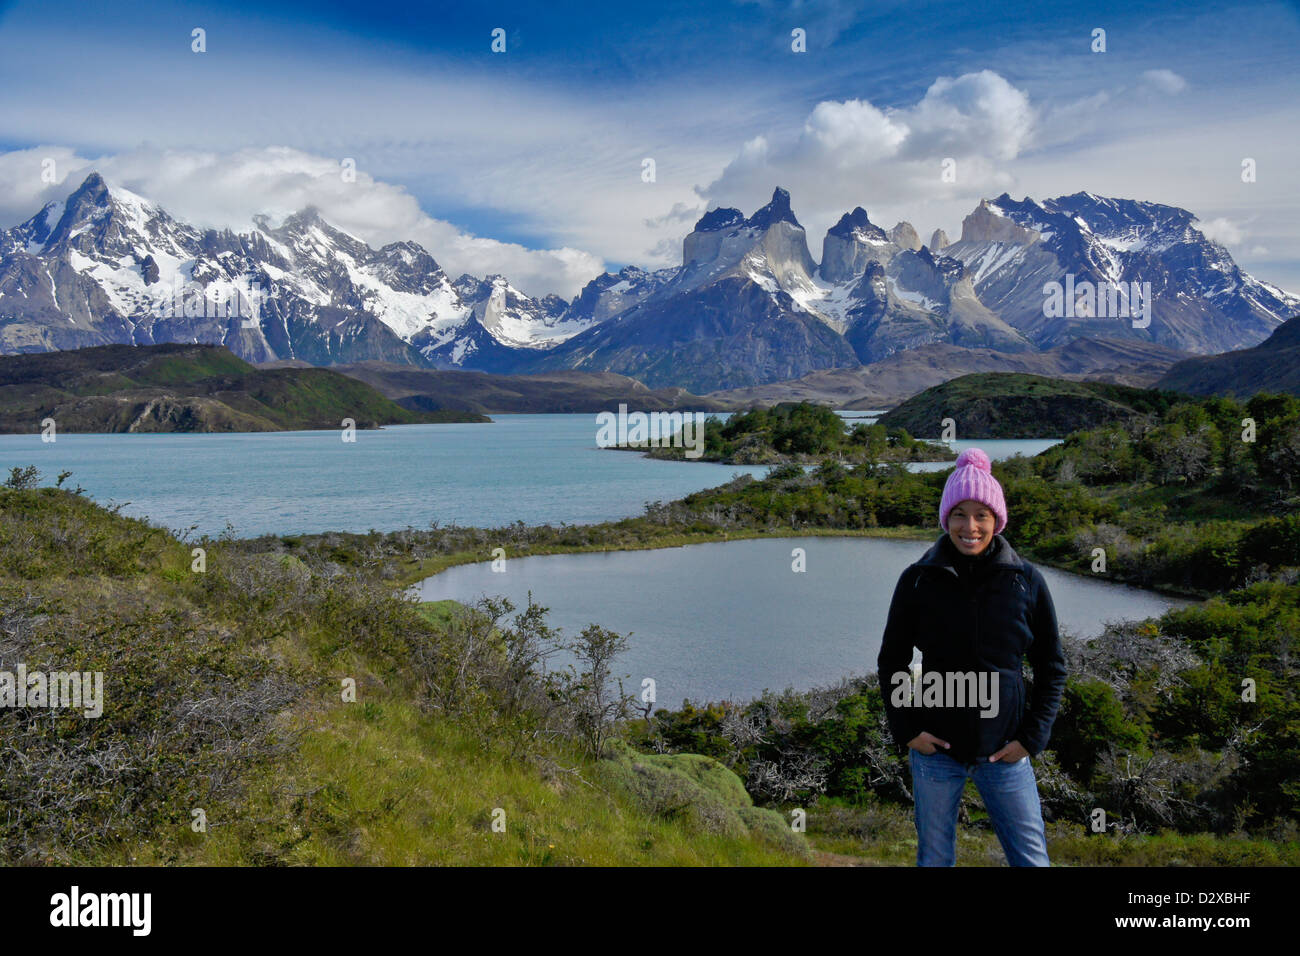 Woman in front of Lago Pehoe, Los Cuernos, and Paine Grande, Torres del Paine National Park, Patagonia, Chile Stock Photo